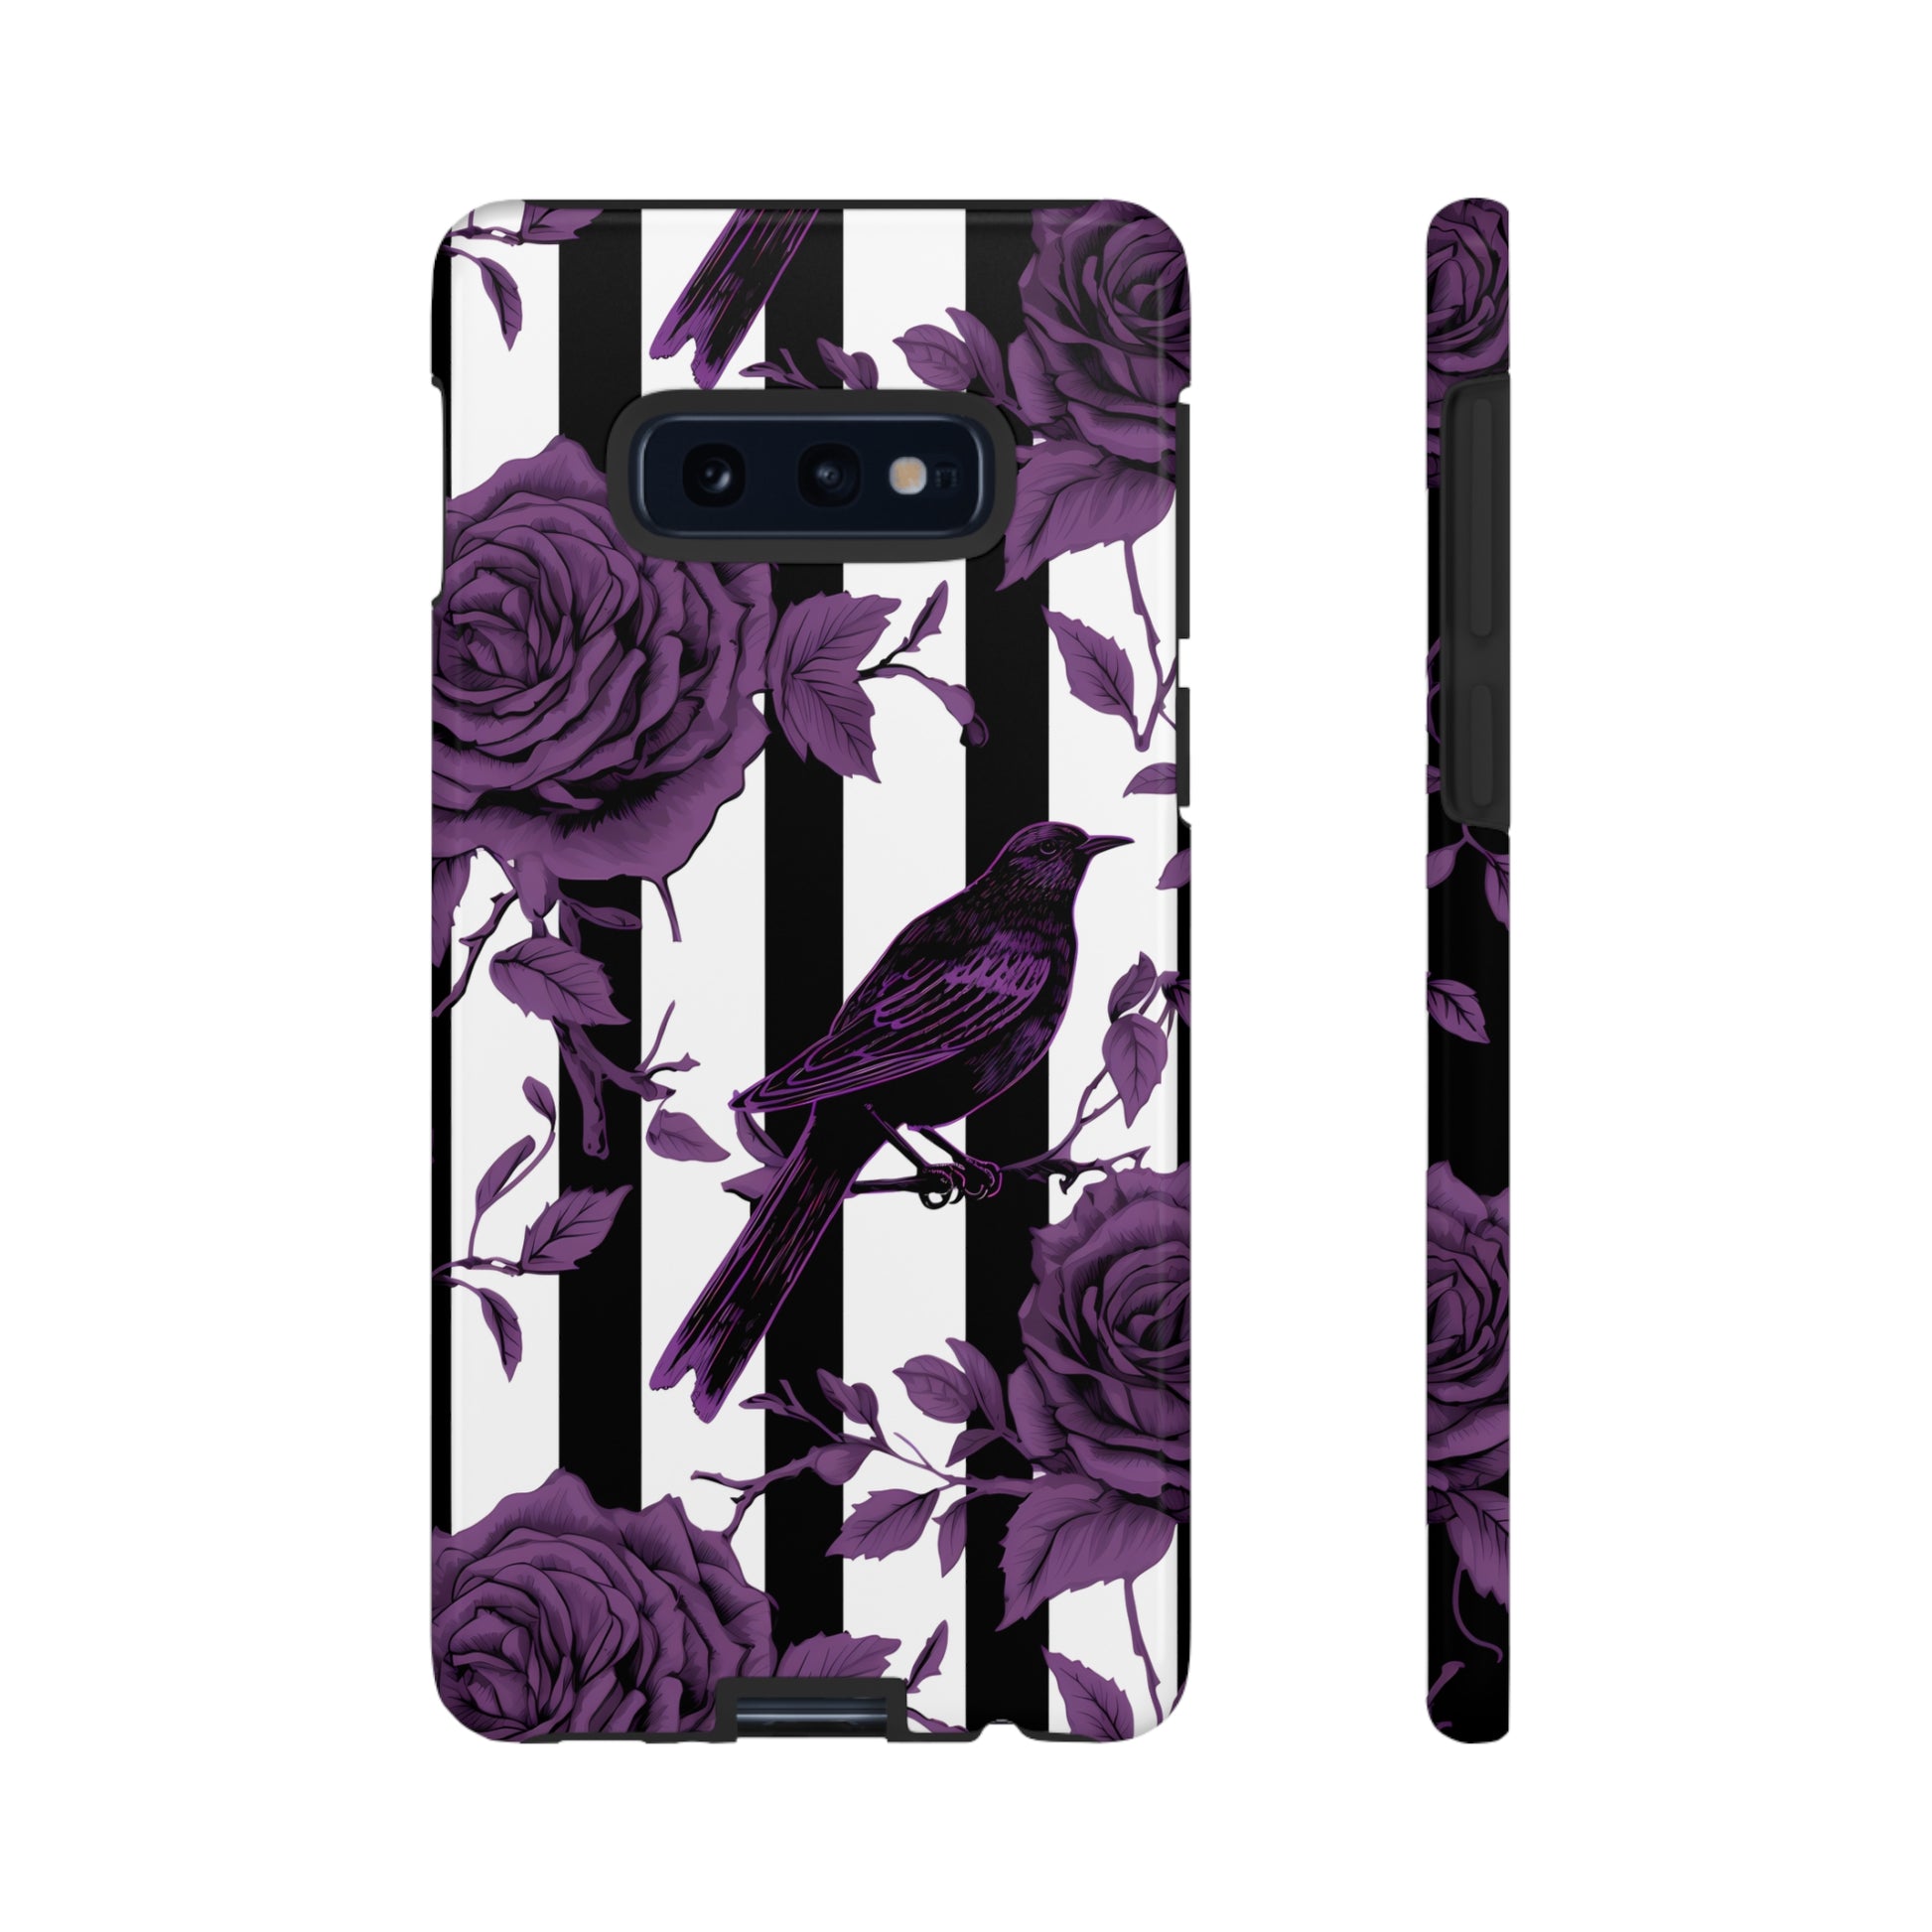 Striped Crows and Roses Tough Cases for iPhone Samsung Google PhonesPhone CaseVTZdesignsSamsung Galaxy S10EGlossyAccessoriescrowsGlossy